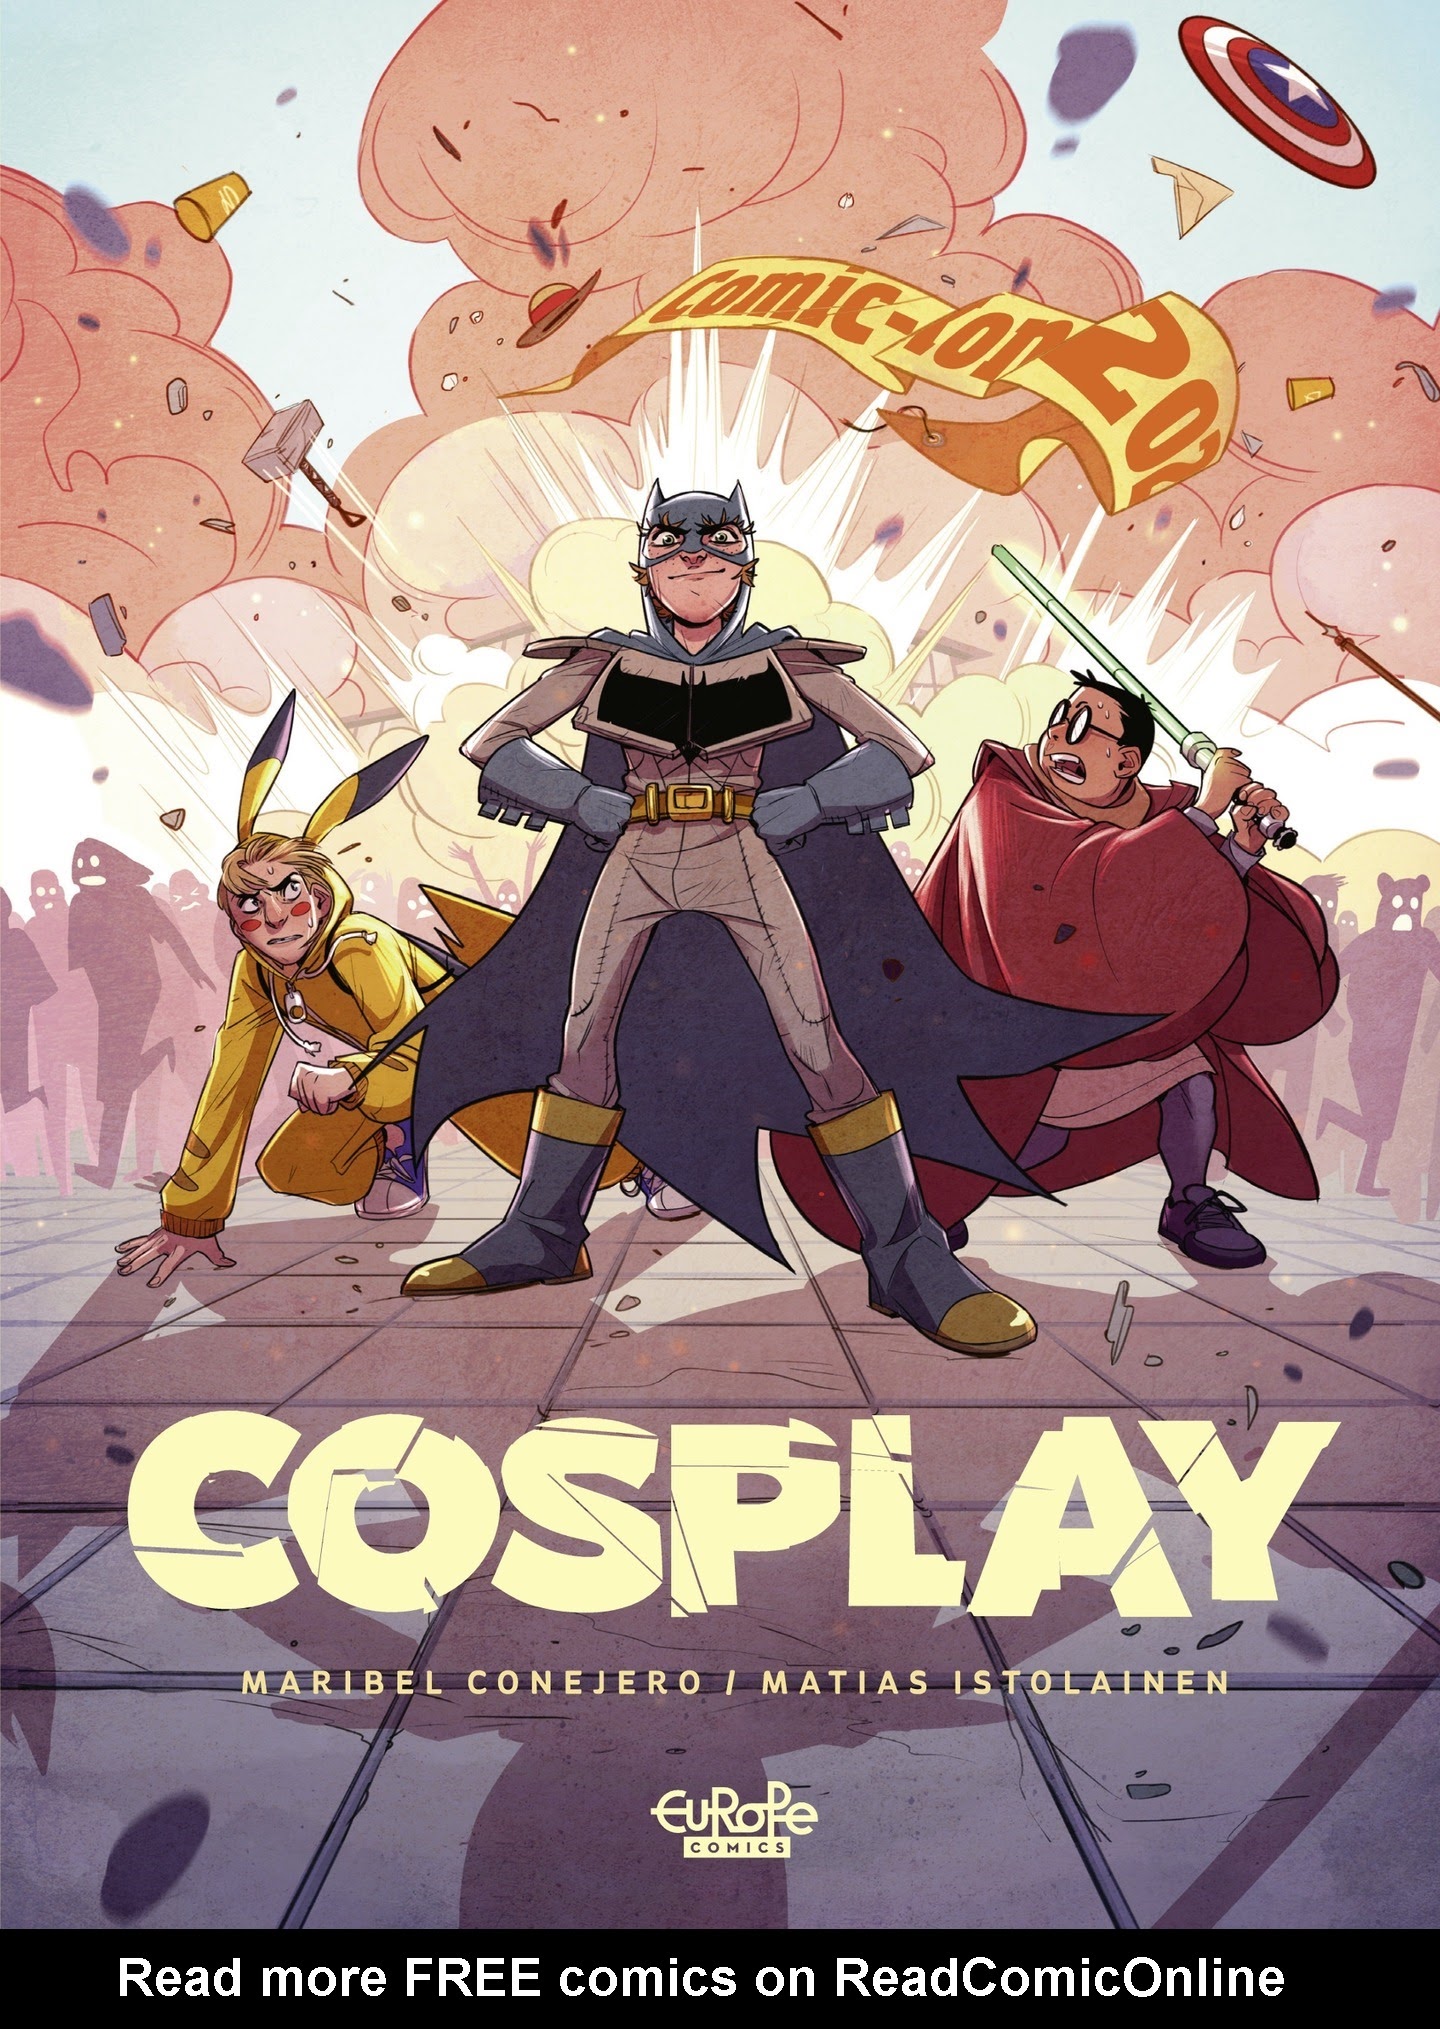 Read online Cosplay comic -  Issue # TPB - 1